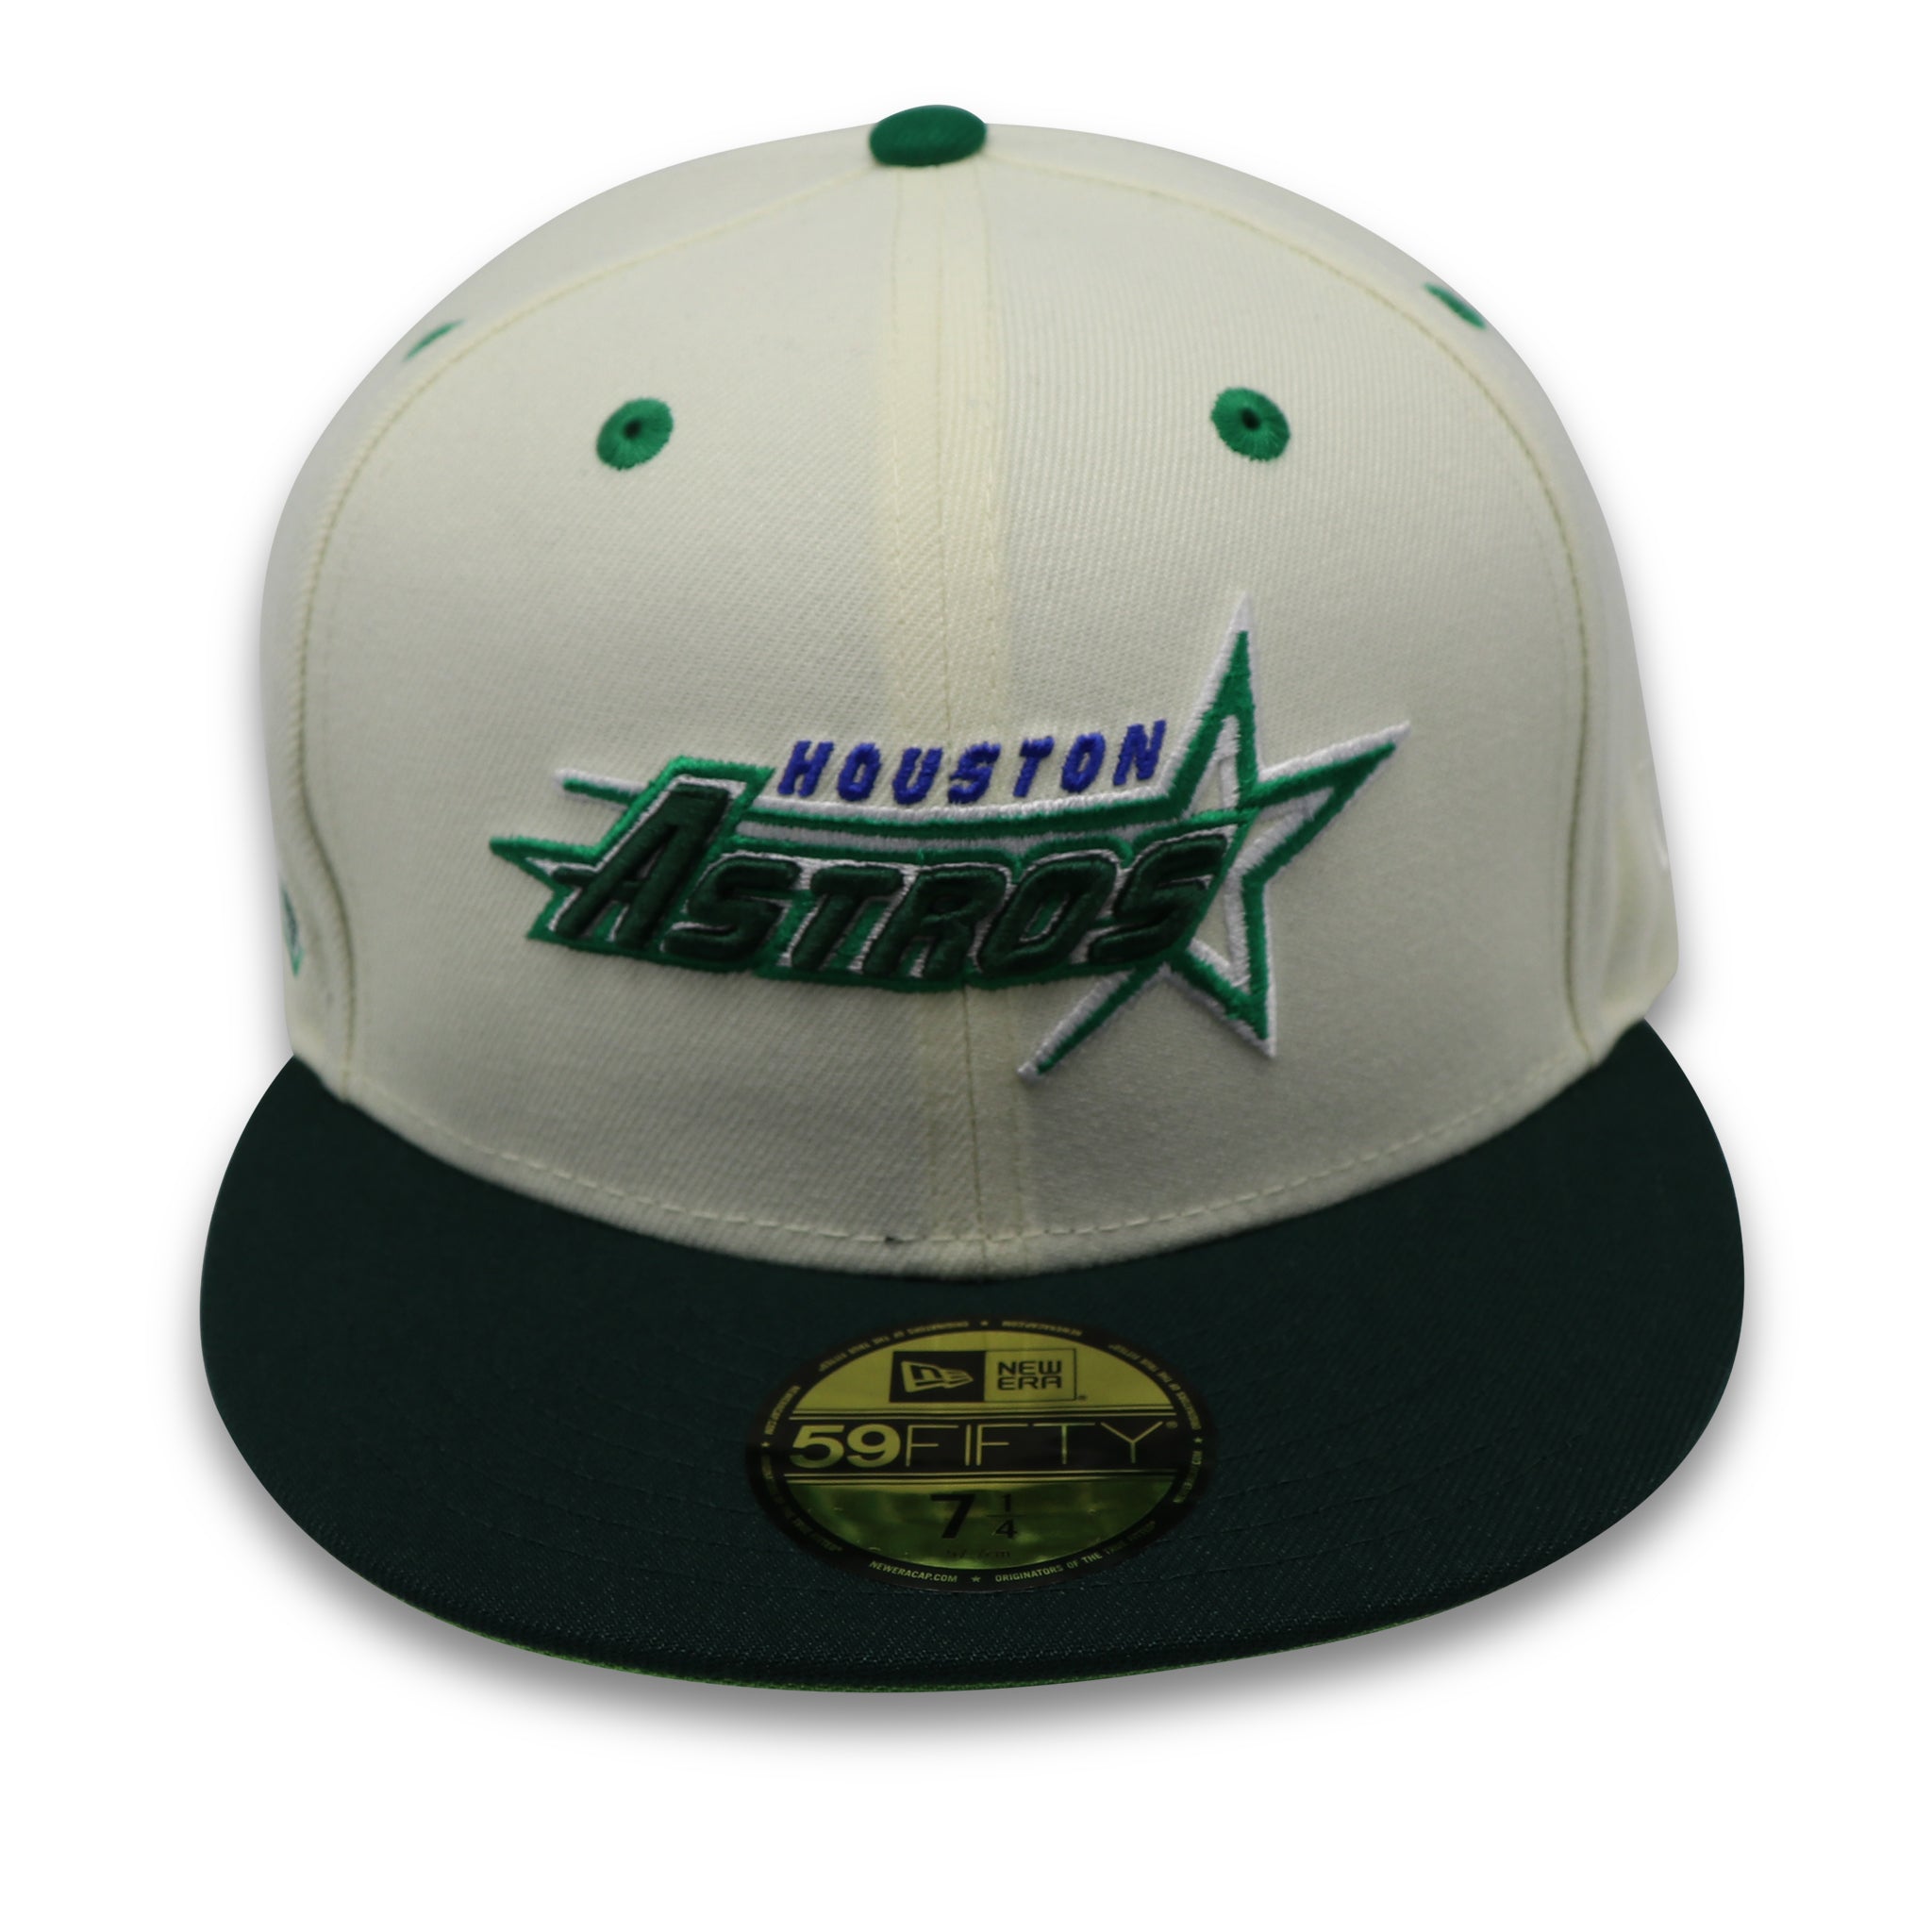 HOUSTON ASTROS (ASTRODOME) NEW ERA 59FIFTY FITTED (LIME UNDER VISOR)